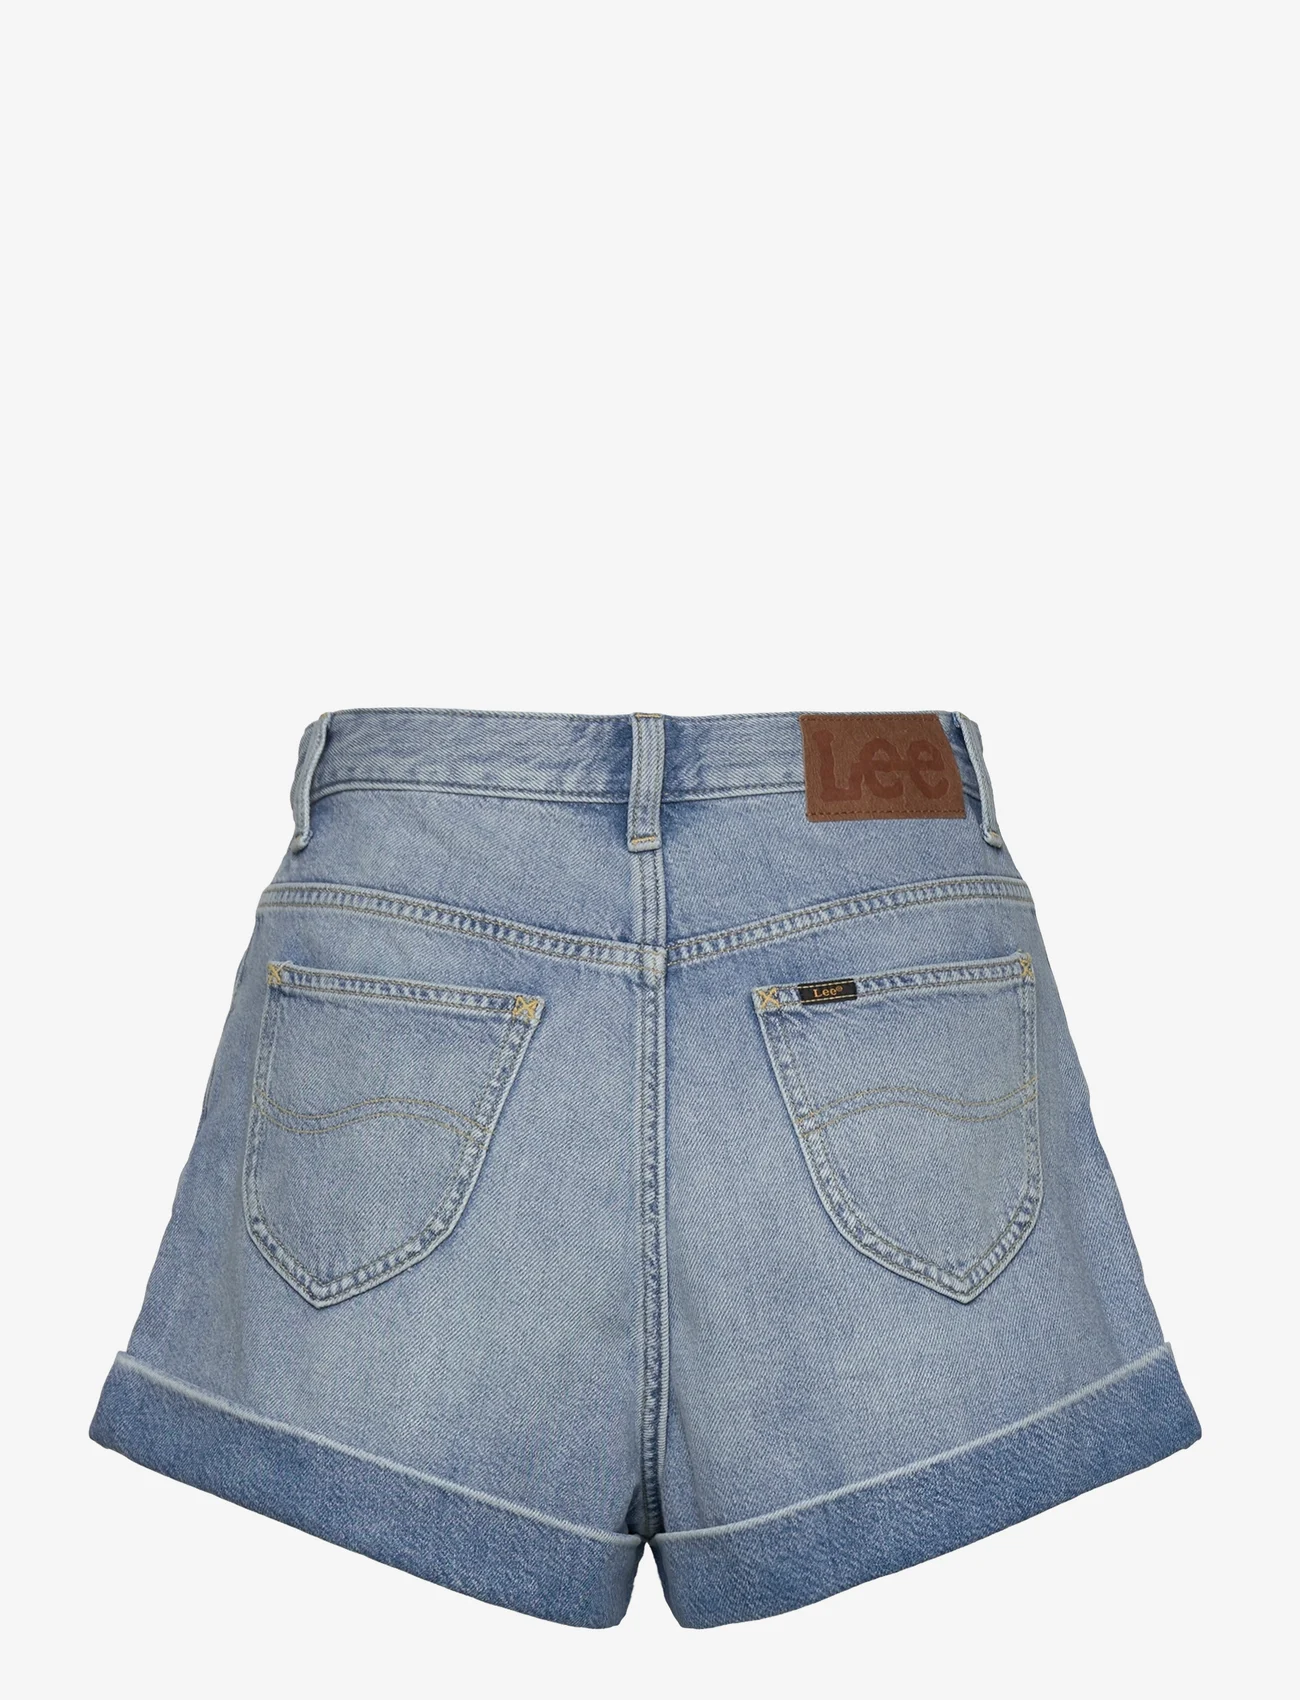 Lee Jeans - PLEATED SHORT - jeansshorts - frosted blue - 1